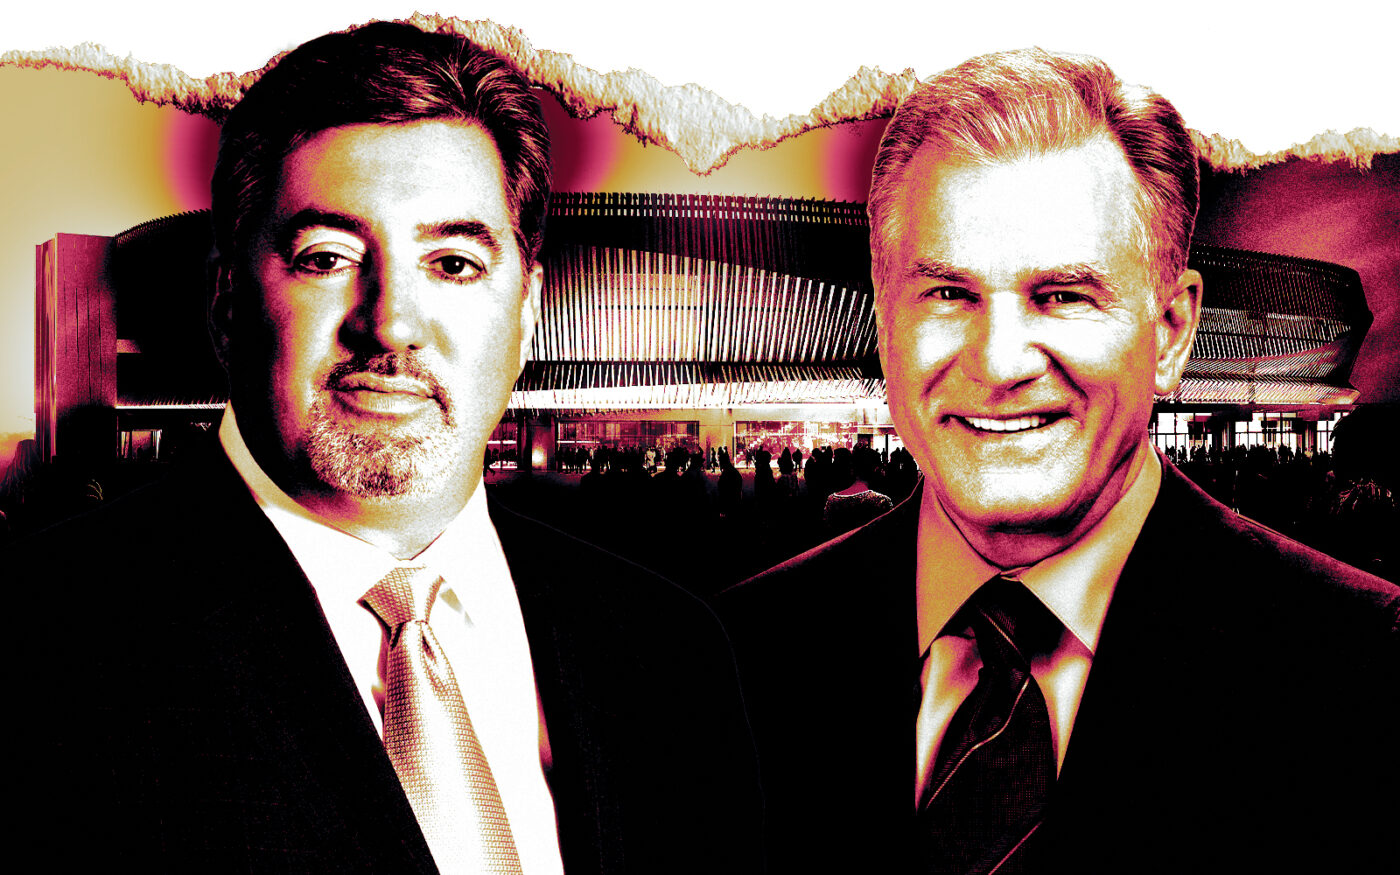 From left: Nick Mastroianni II, Las Vegas Sands CEO Rob Goldstein and the Nassau Coliseum (Getty, Las Vegas Sands)